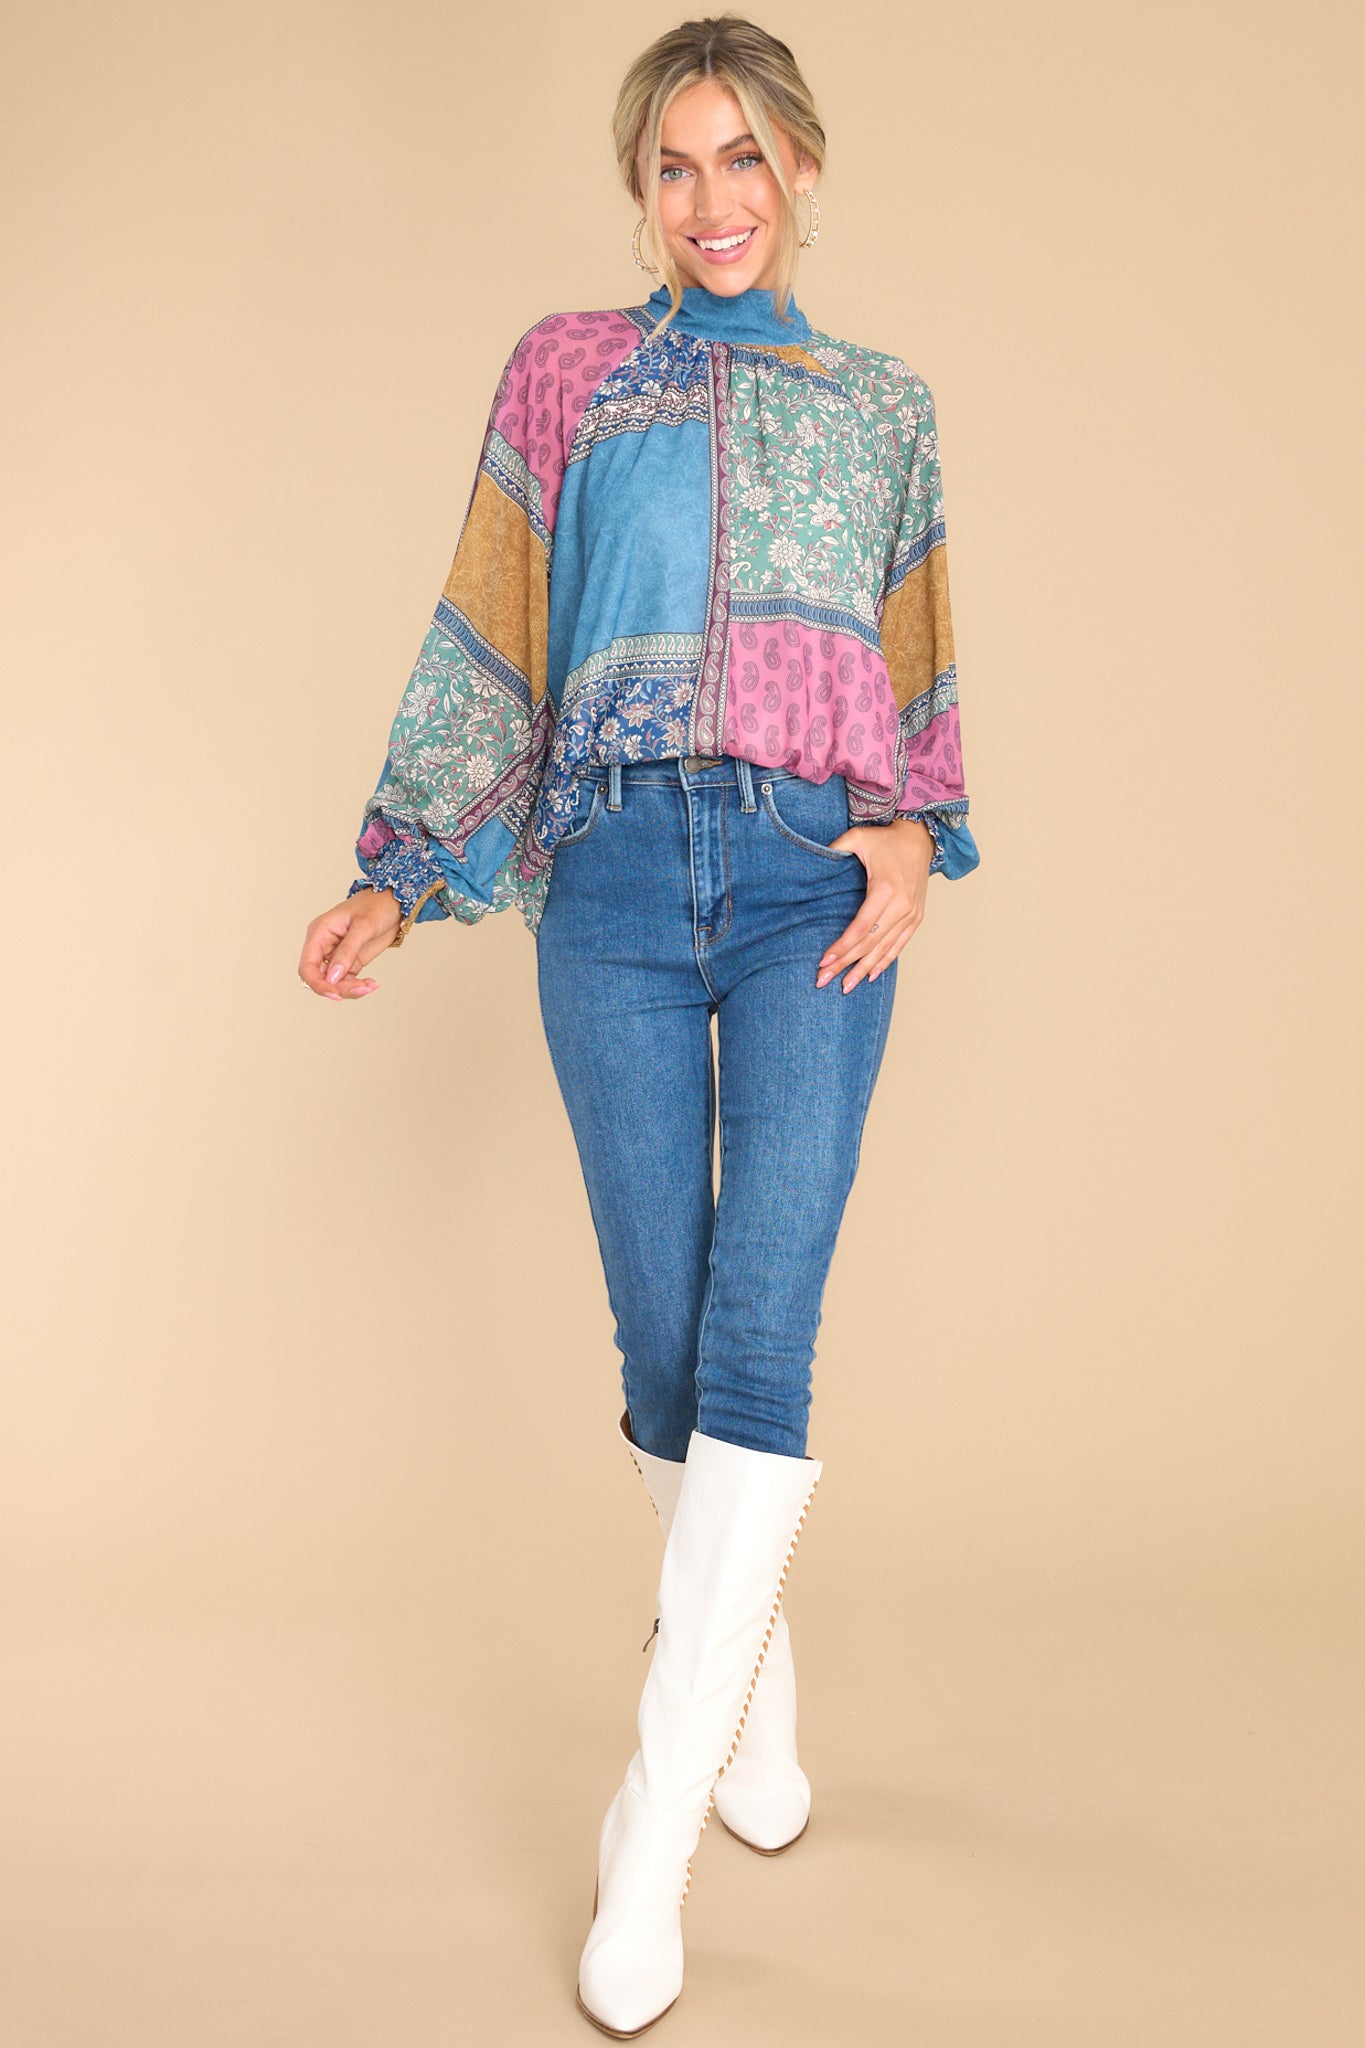 This multi-colored high-neck blouse features an adjustable self-tie around the neck, a small keyhole backing closed by a button loop closure, balloon sleeves with elastic cuffs, and a patchwork style design.